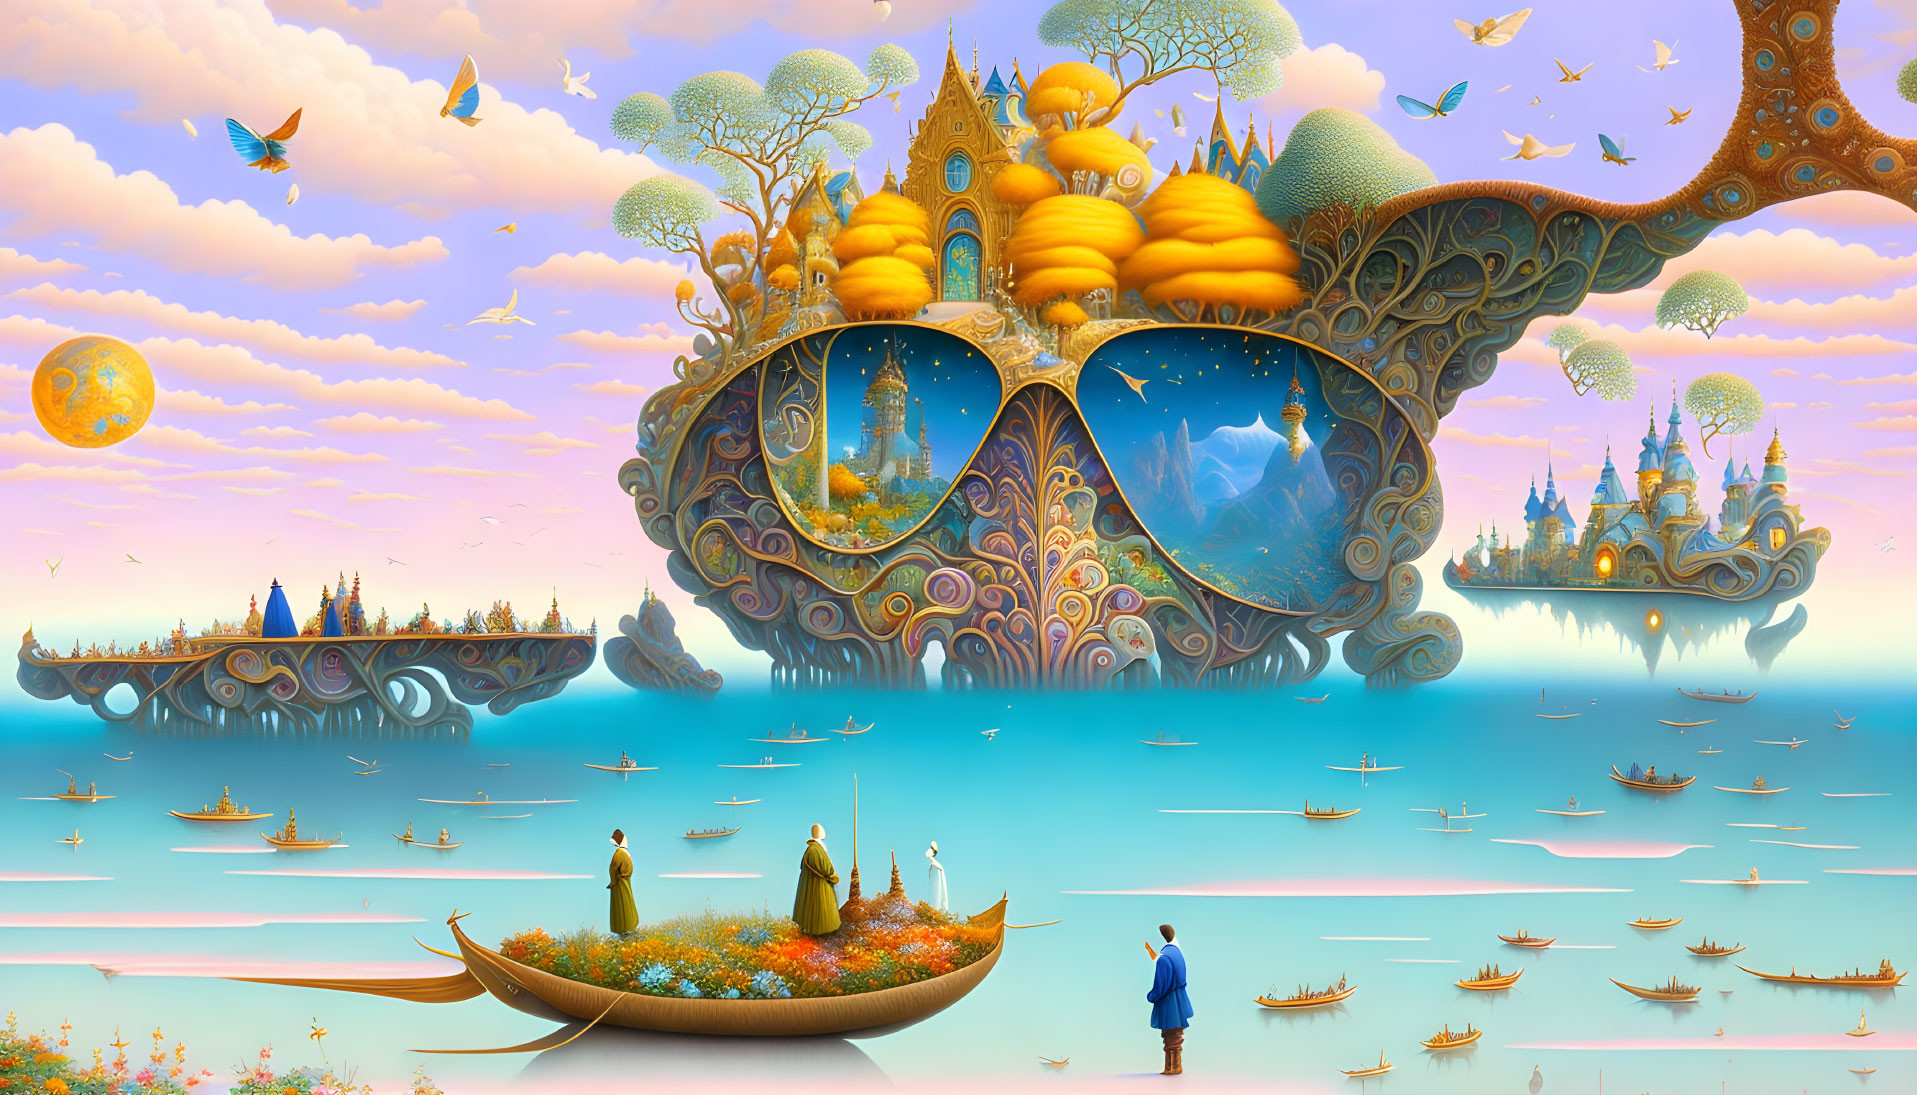 Surreal landscape featuring oversized eyeglasses, castle, floating cities, tree, boats, and